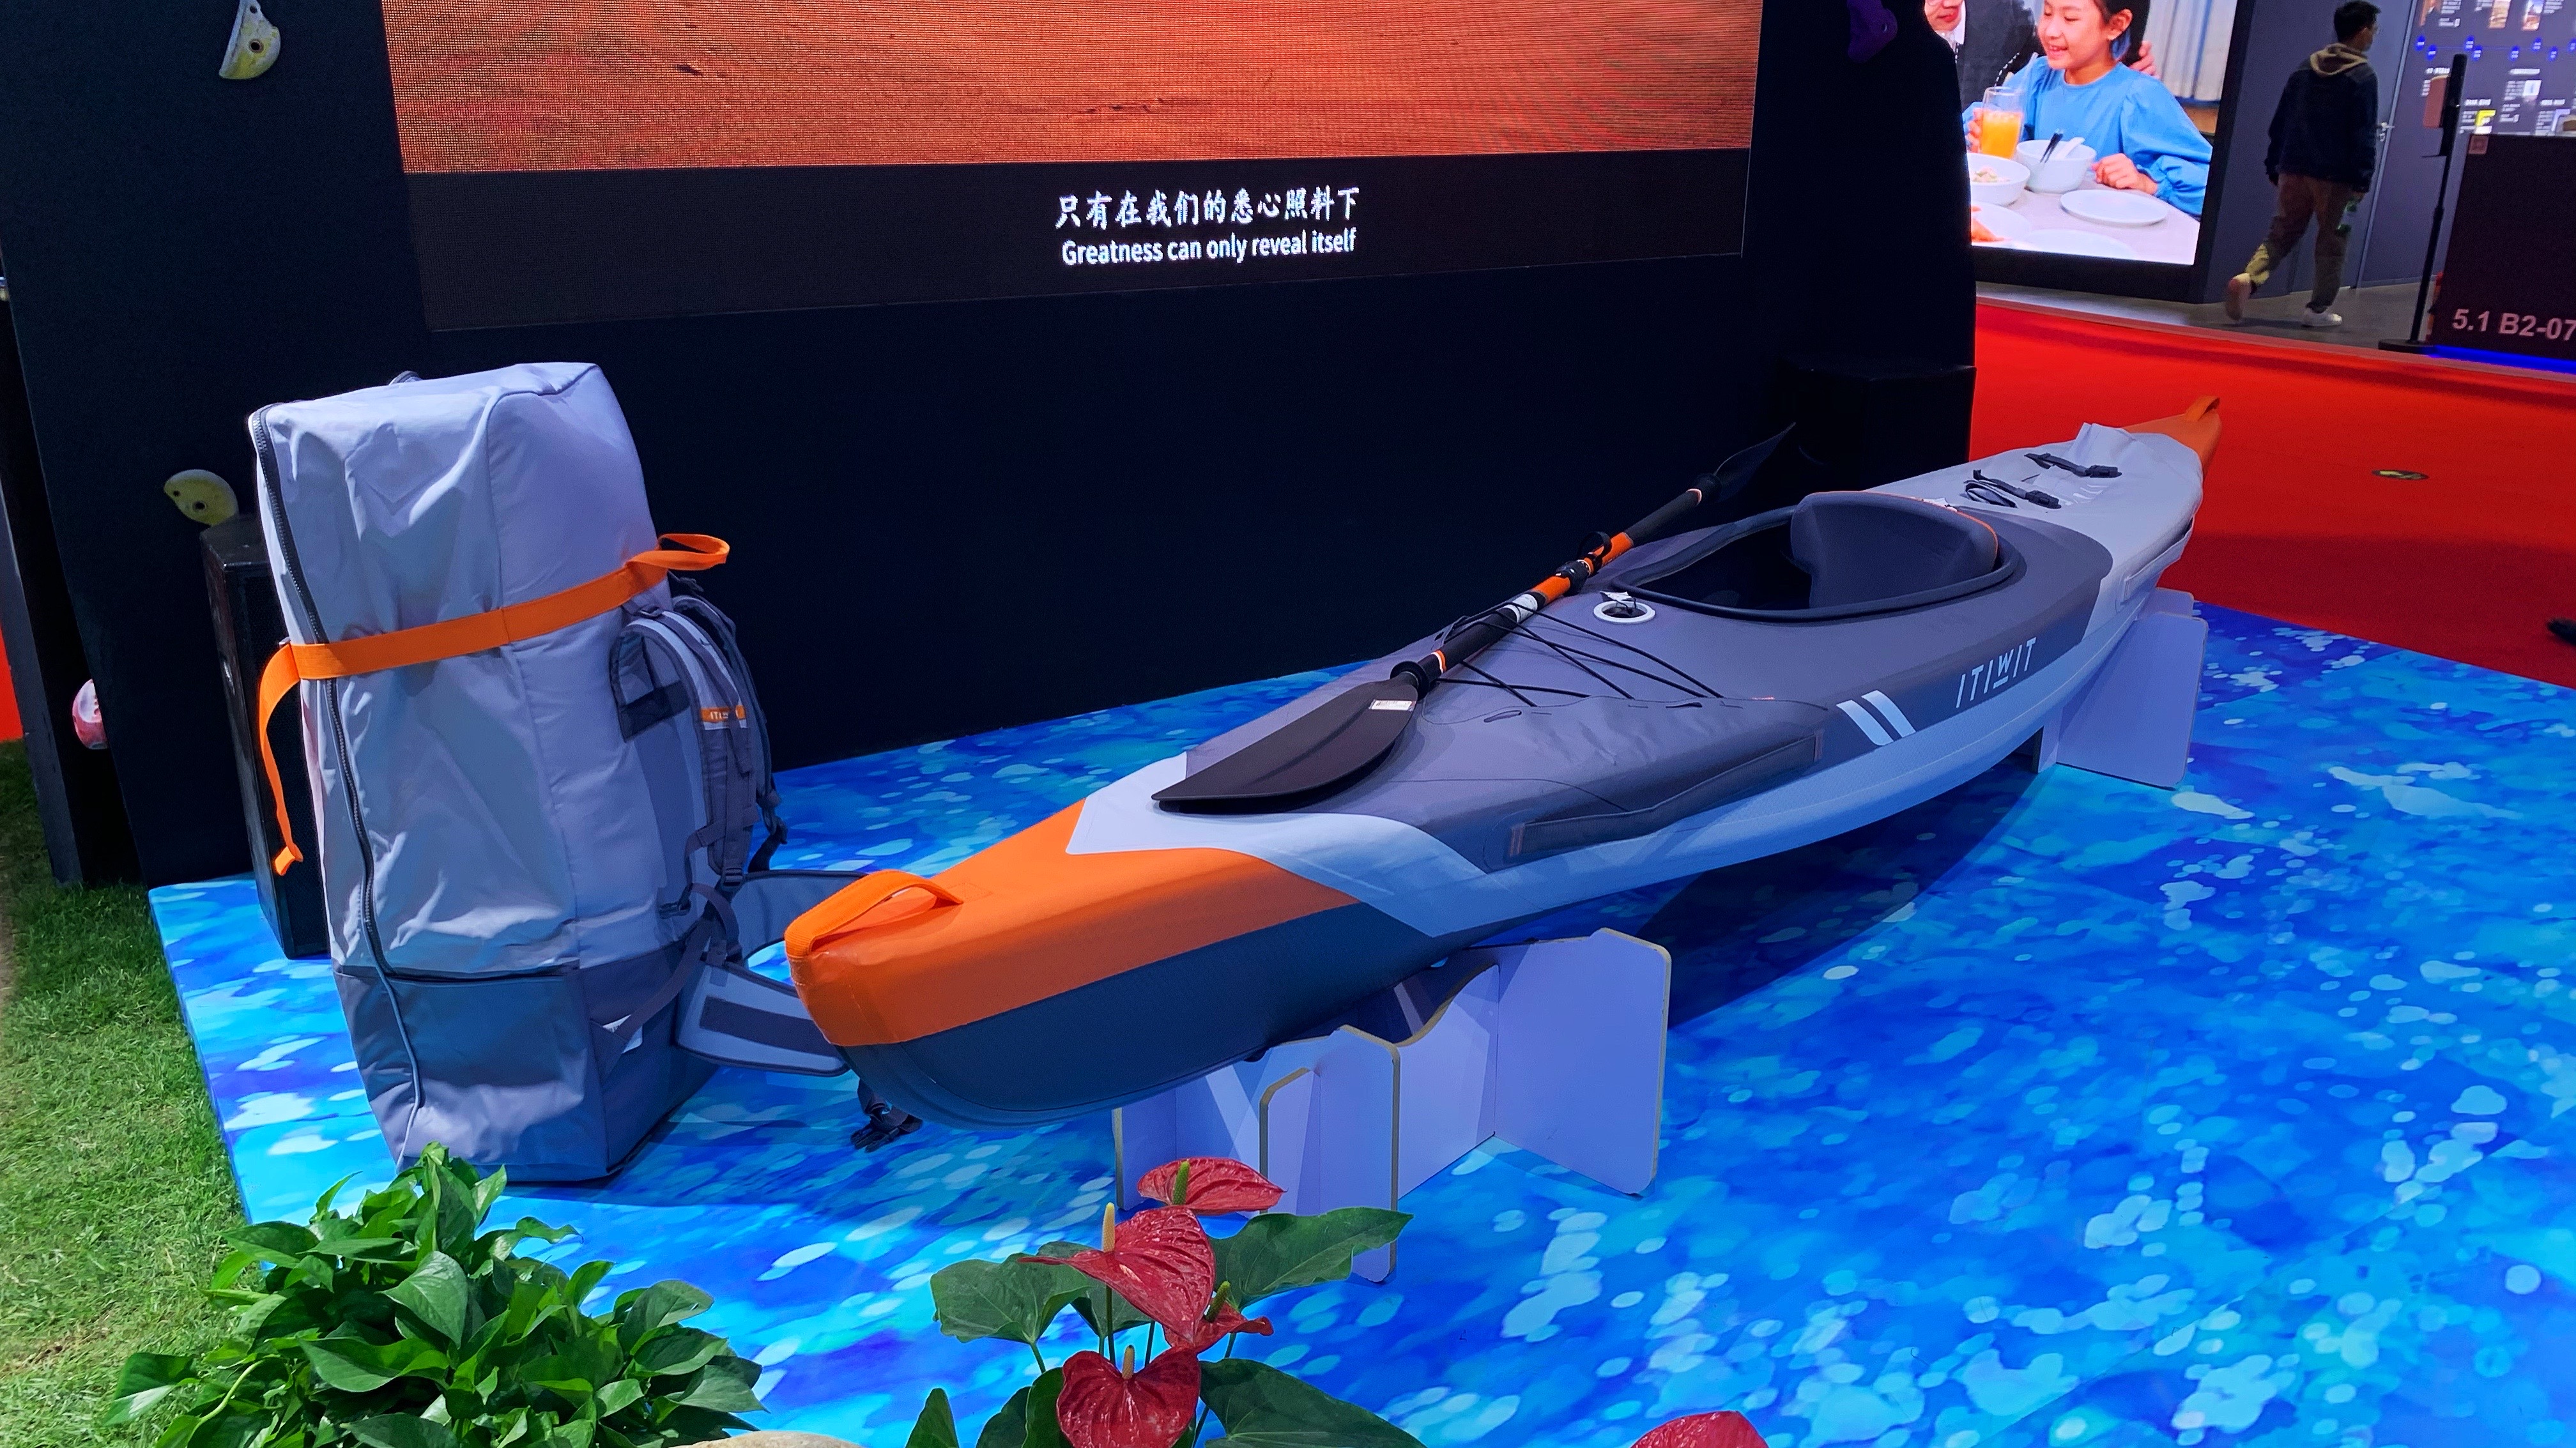 Pack a getaway boat on your back: displays collapsible kayak - CGTN